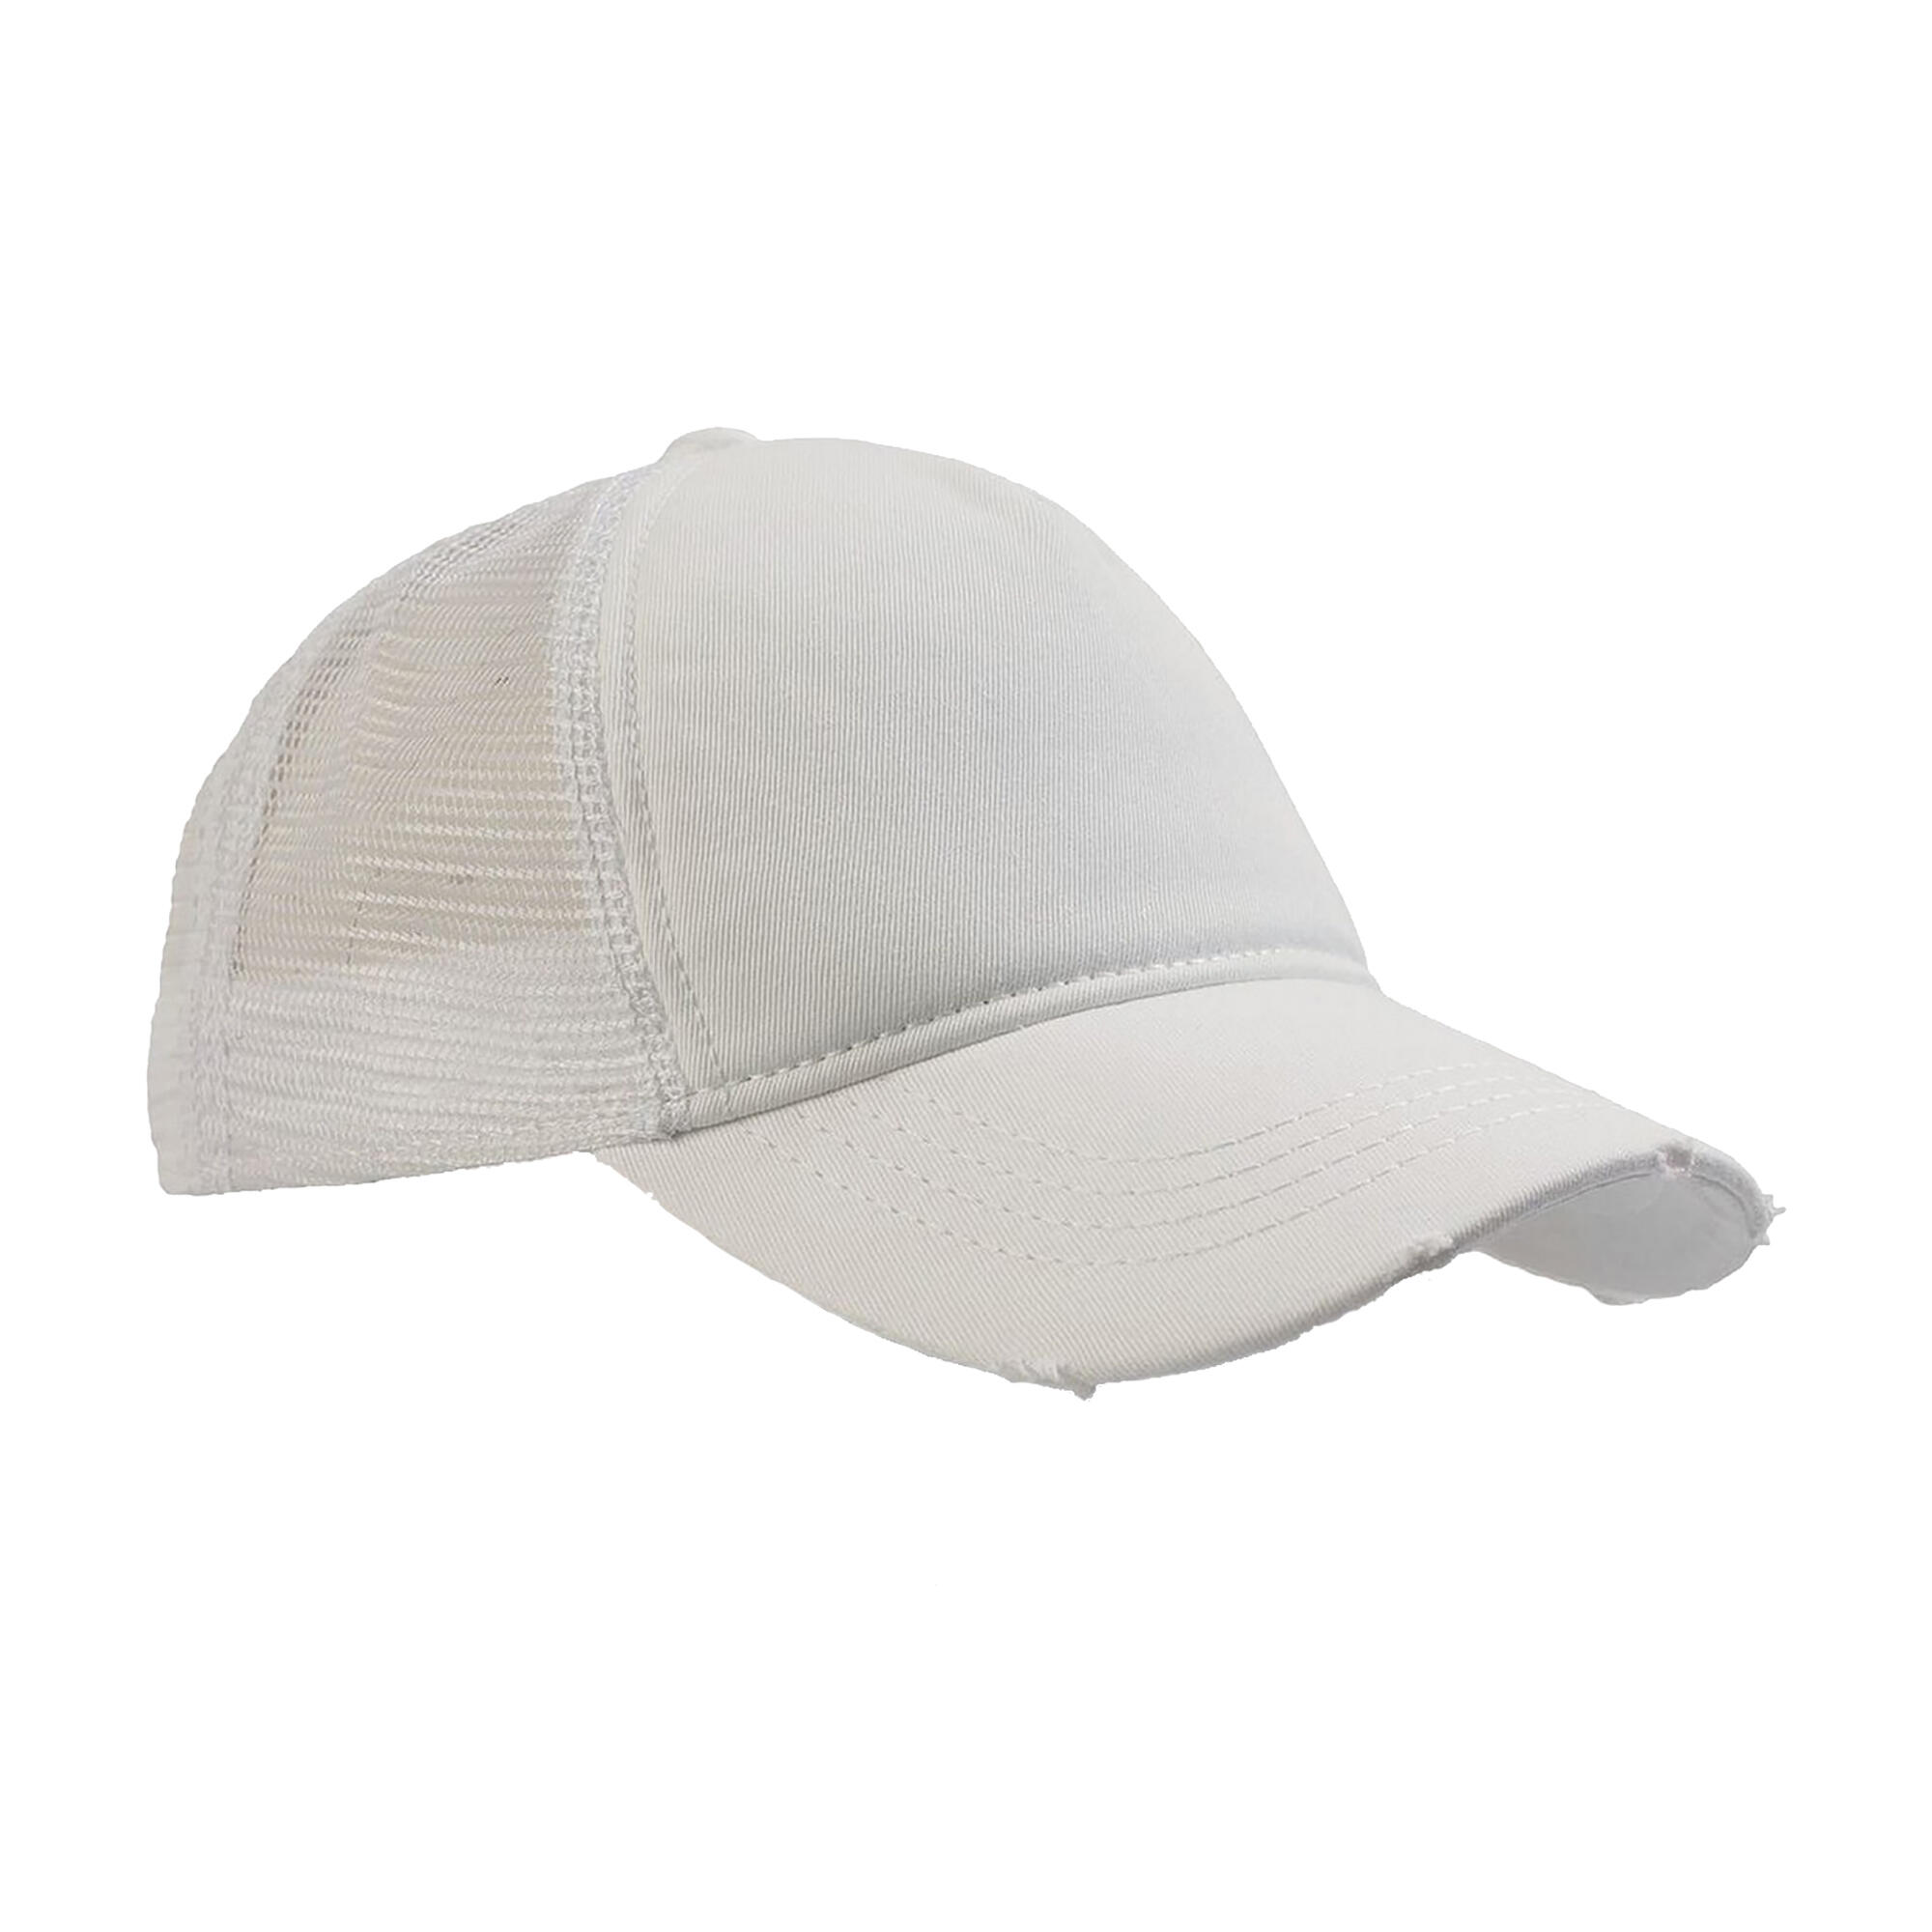 Rapper Destroyed 5 Panel Weathered Trucker Cap (Pack of 2) (White/White) 3/3